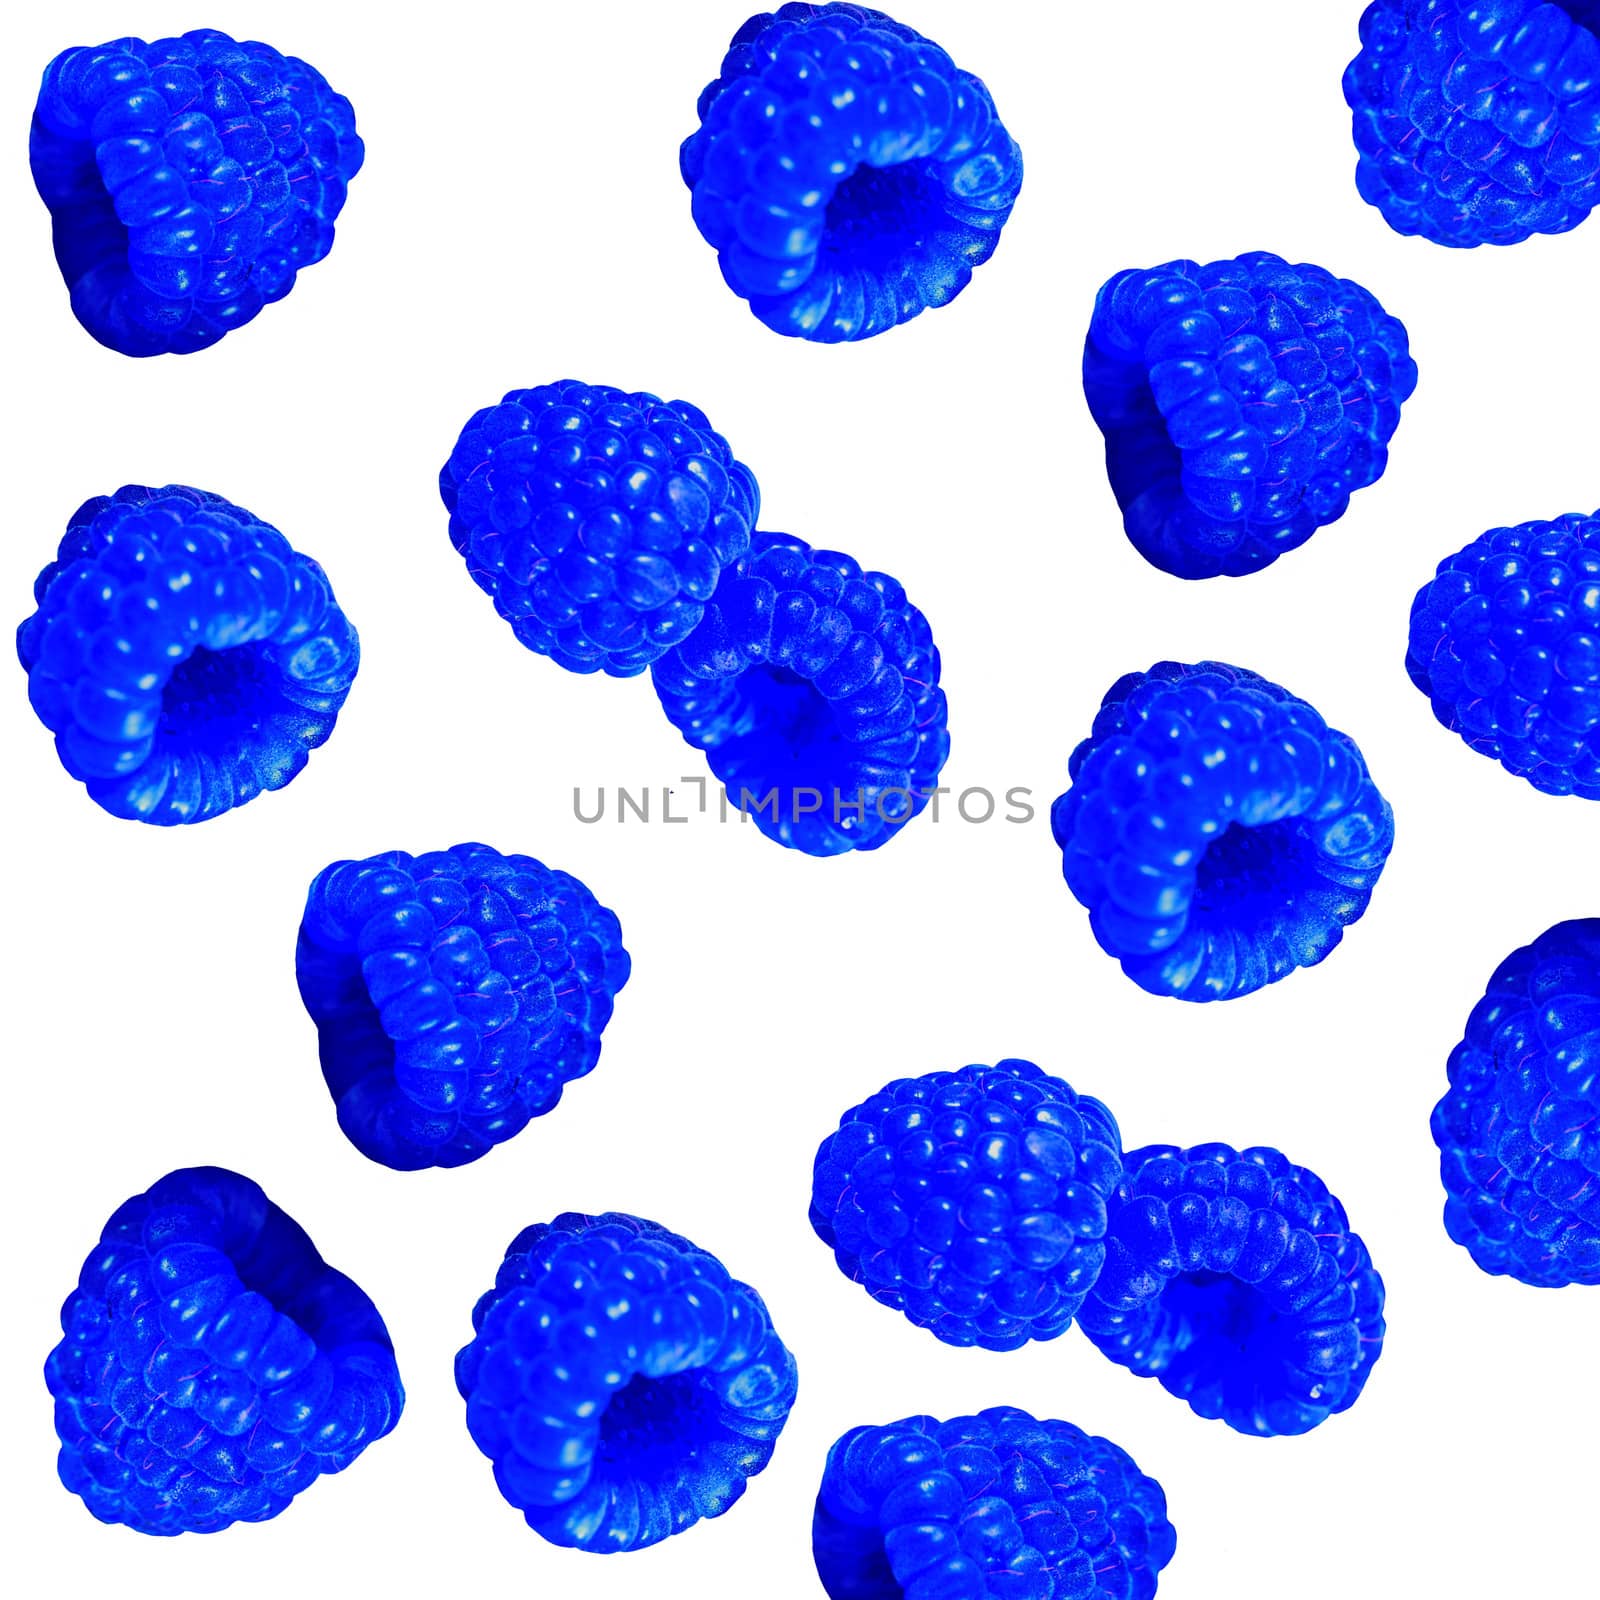 Pattern of Fresh sweet blue raspberries texture background. Delicious first class blue berries.